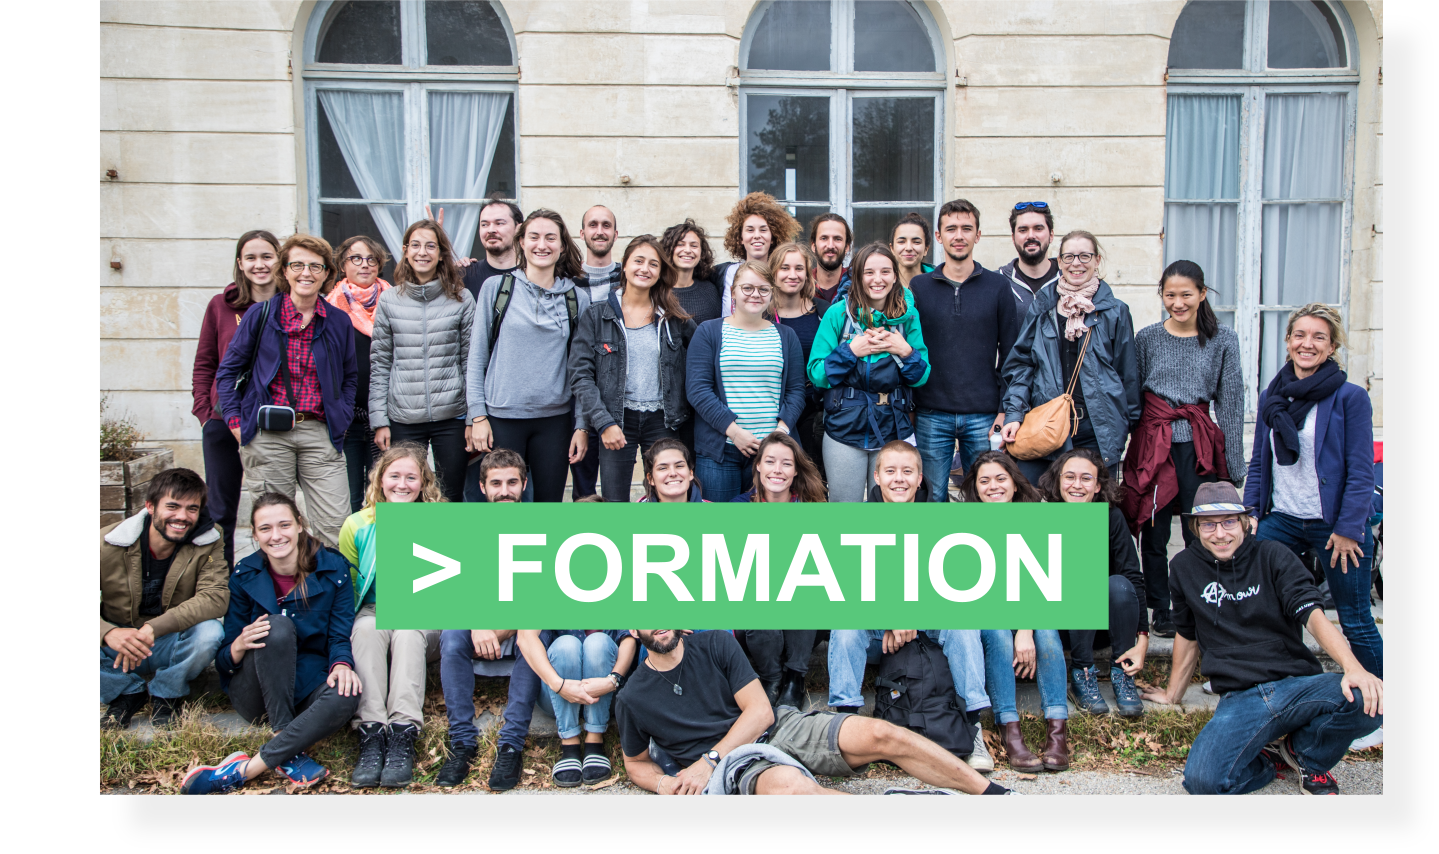 //www.isige.mines-paristech.fr/wp-content/uploads/2019/12/formation_a_isige-1.png